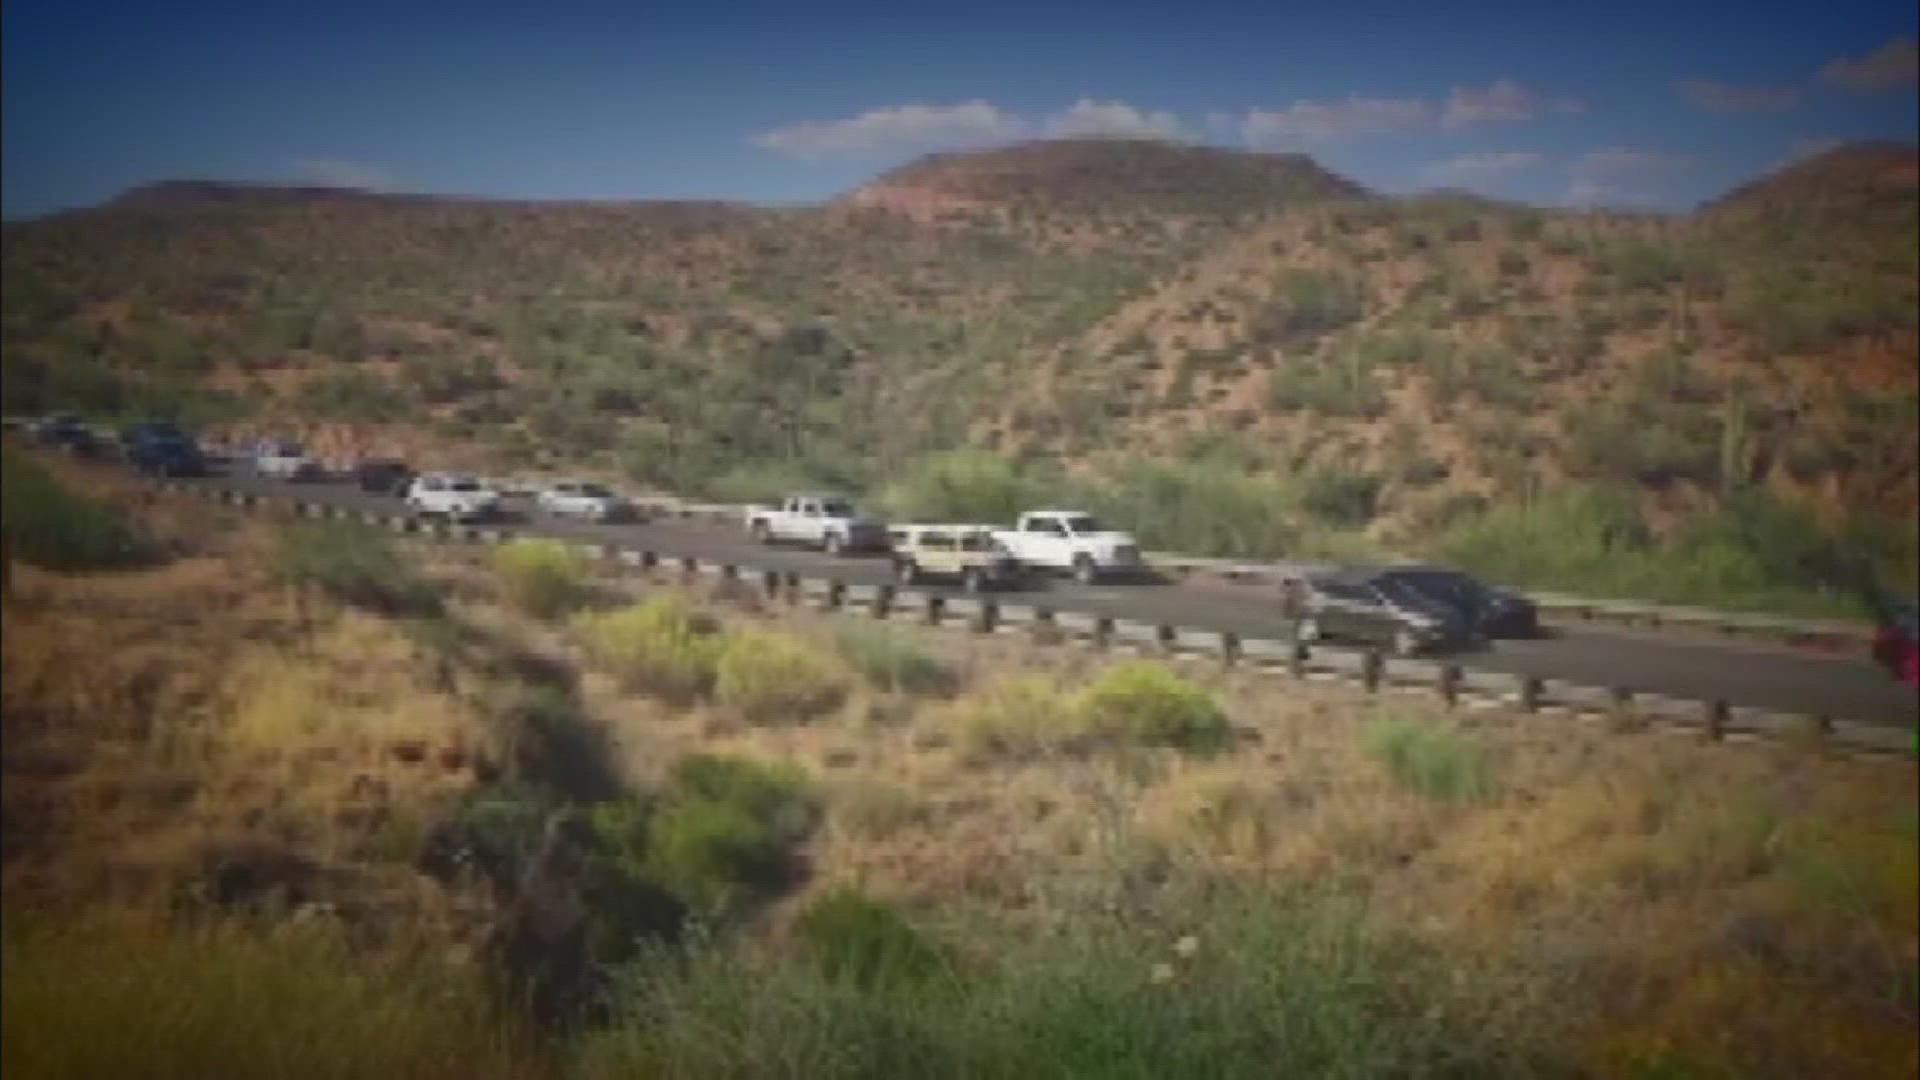 A 23-mile section of Interstate 17 is in the process of being widened to relieve some of the traffic congestion observed between Phoenix and Flagstaff.